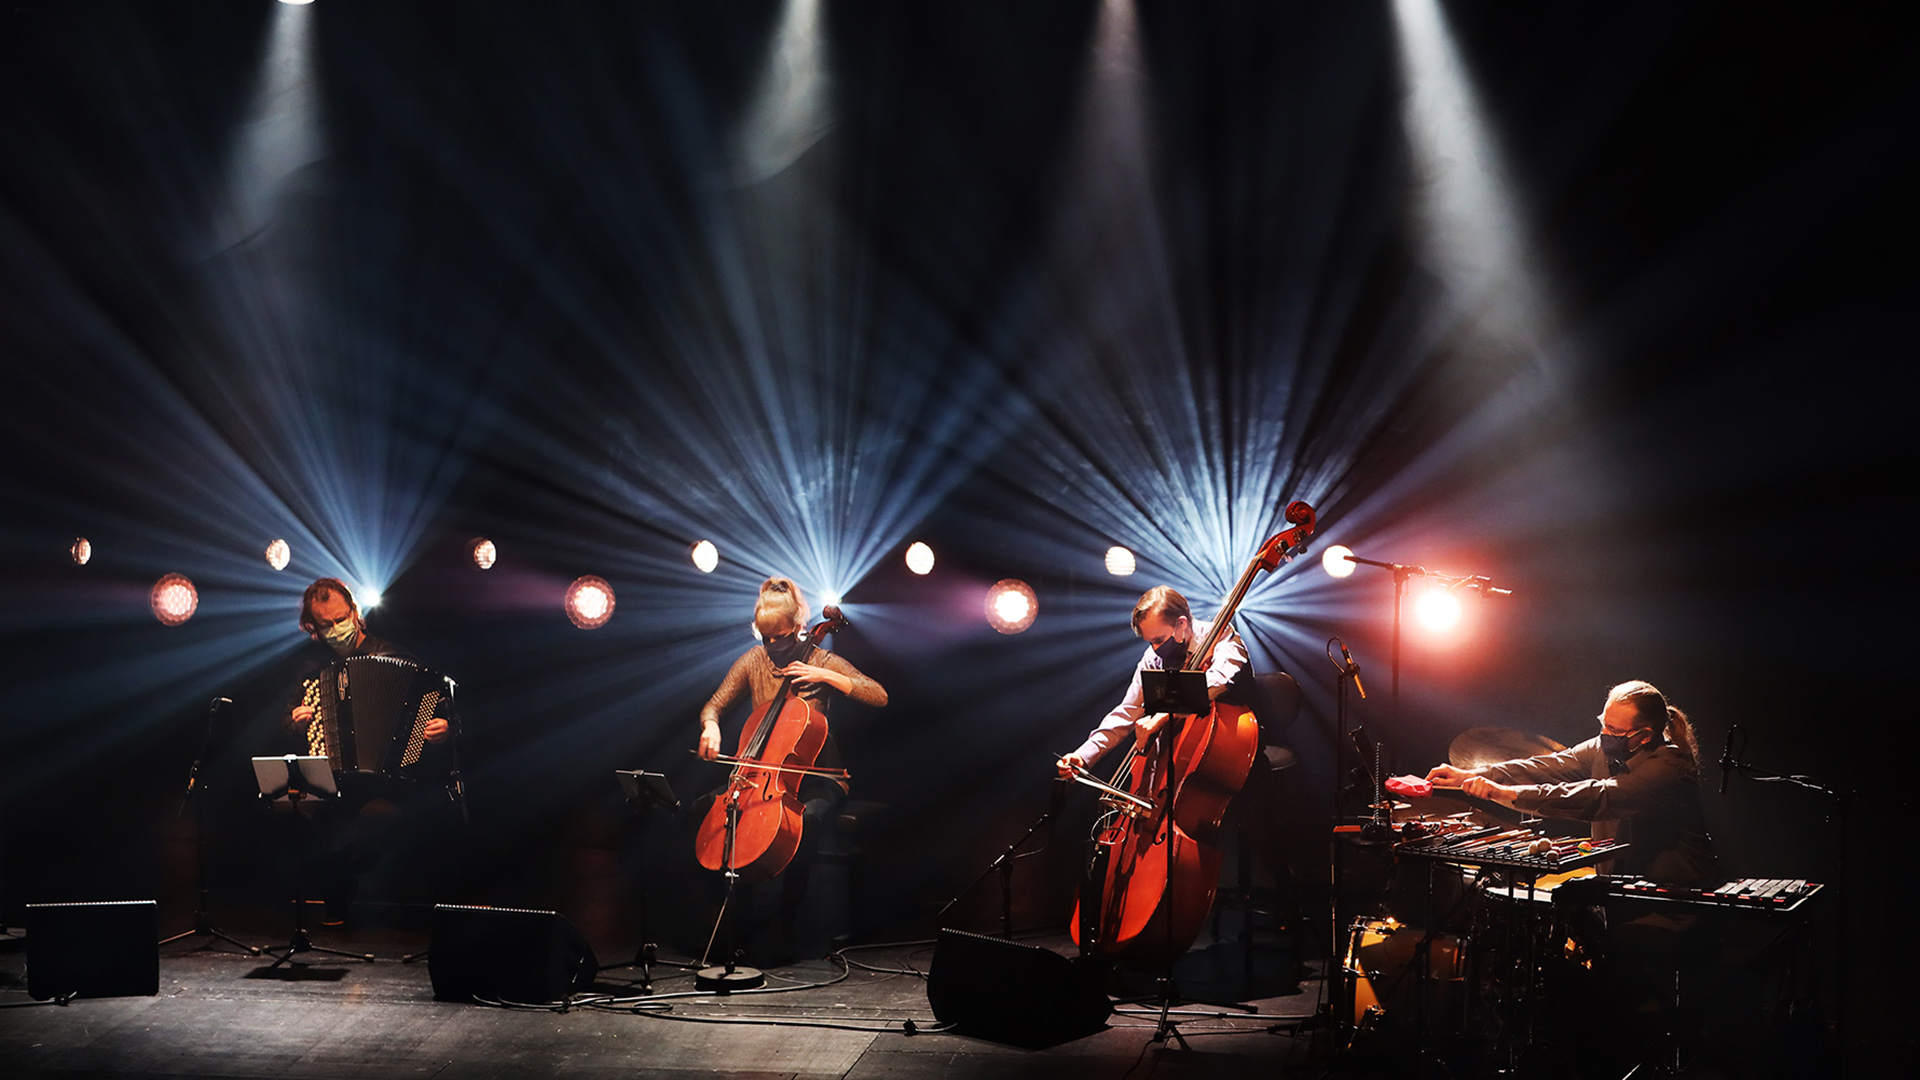 Drummer, two cellists and accordionist playing on a stage.